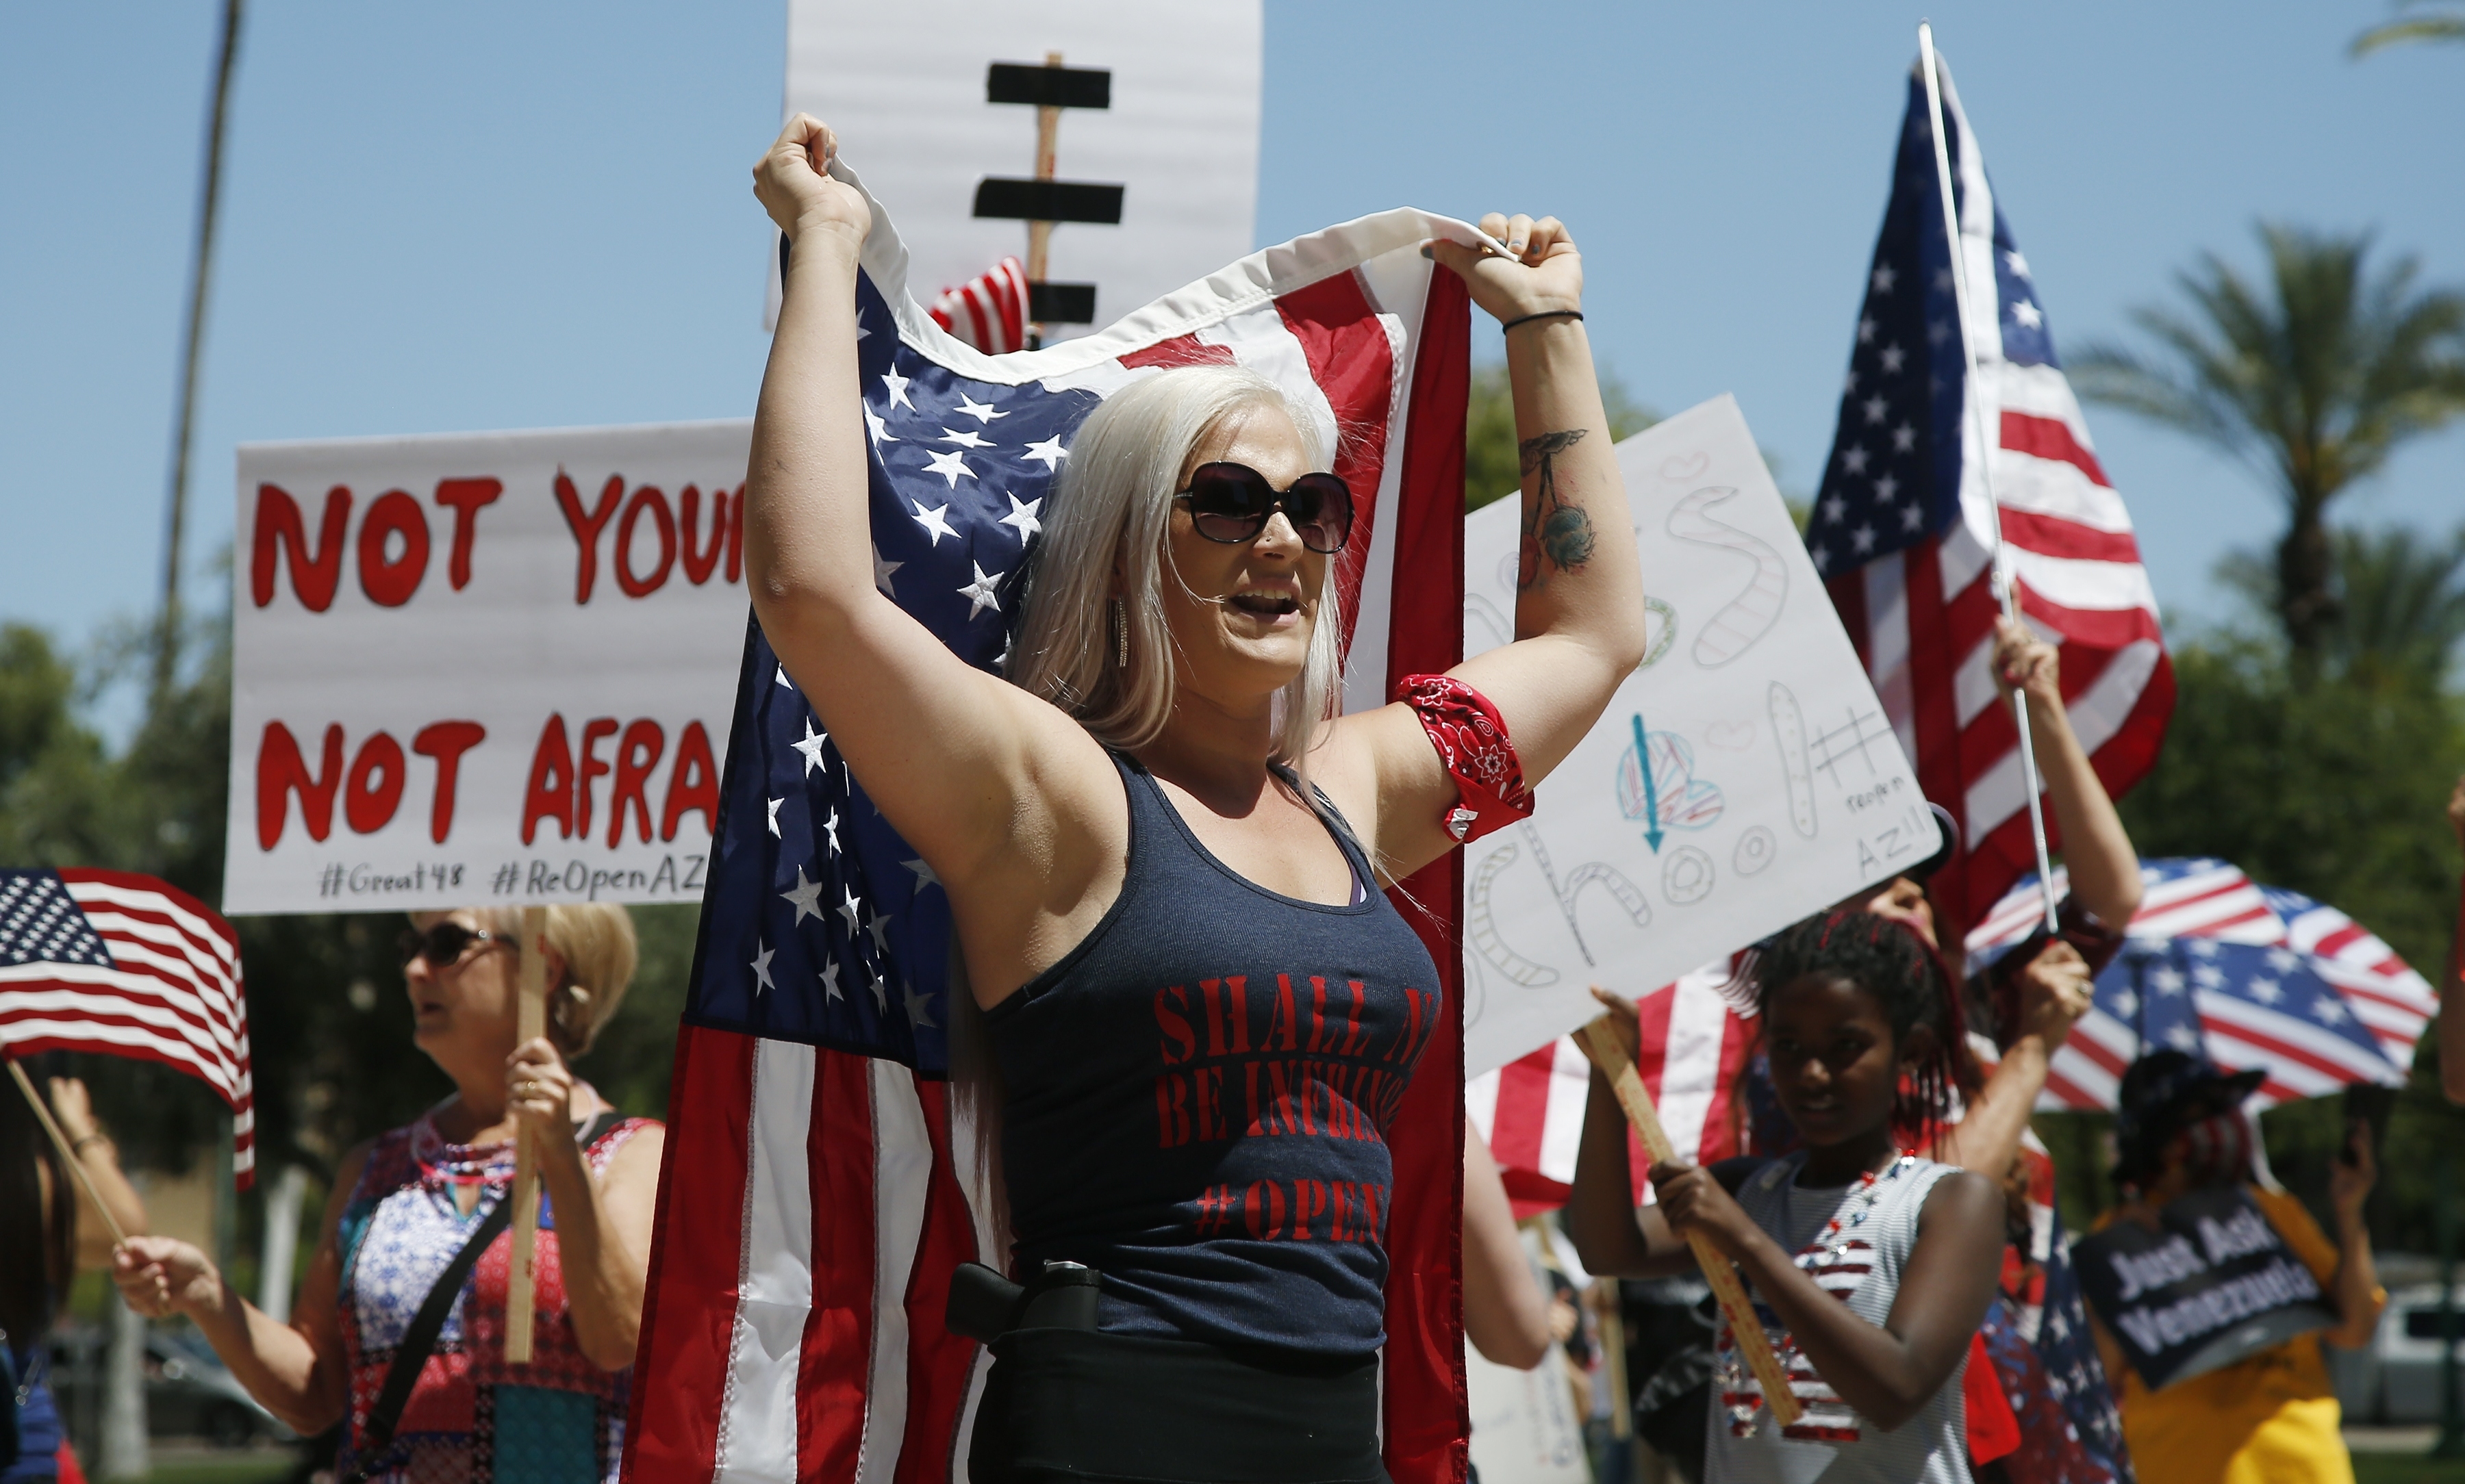 Protesters rally at the state Capitol to 're-open' Arizona against the governor's stay-at-home order due to the coronavirus Monday, April 20, 2020, in Phoenix. (AP Photo/Ross D. Franklin)